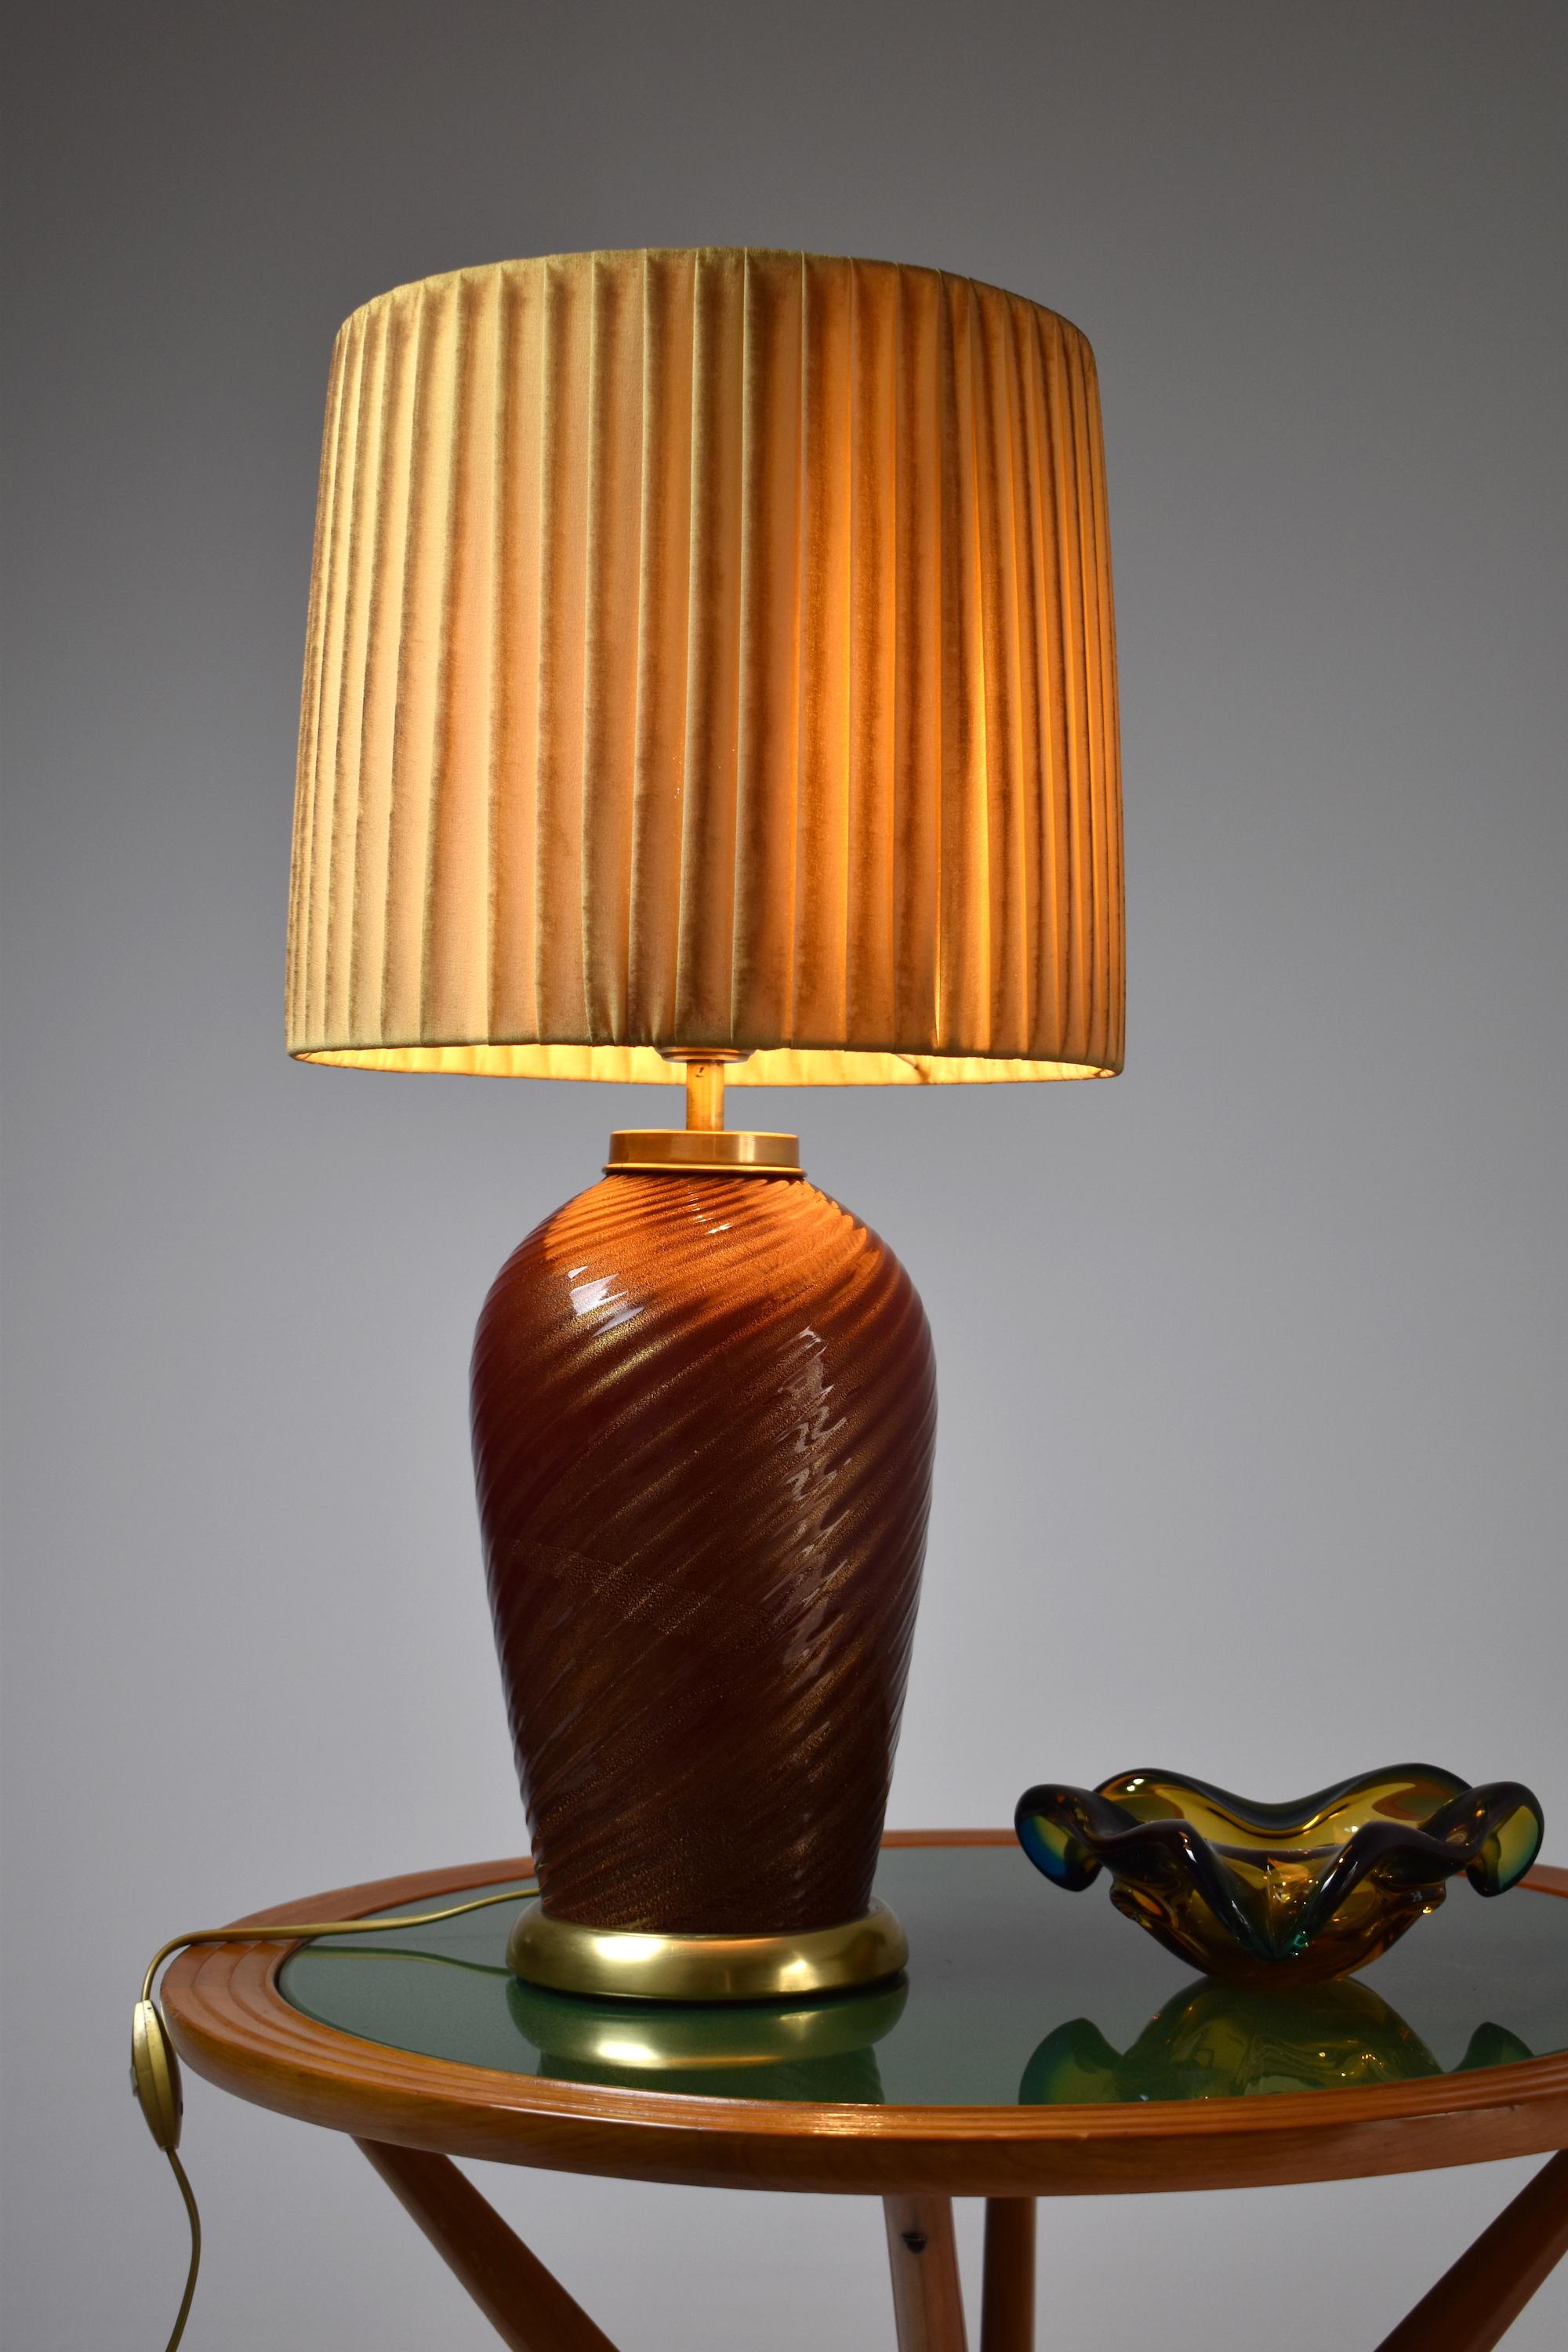 A magnificent 20th-century vintage table lamp by notable Italian designer Tommaso Barbi circa 1970's. This stand-out lighting piece is crafted with a Murano burnt orange dark red swirl glass with gold shimmers all over and polished brass rims.